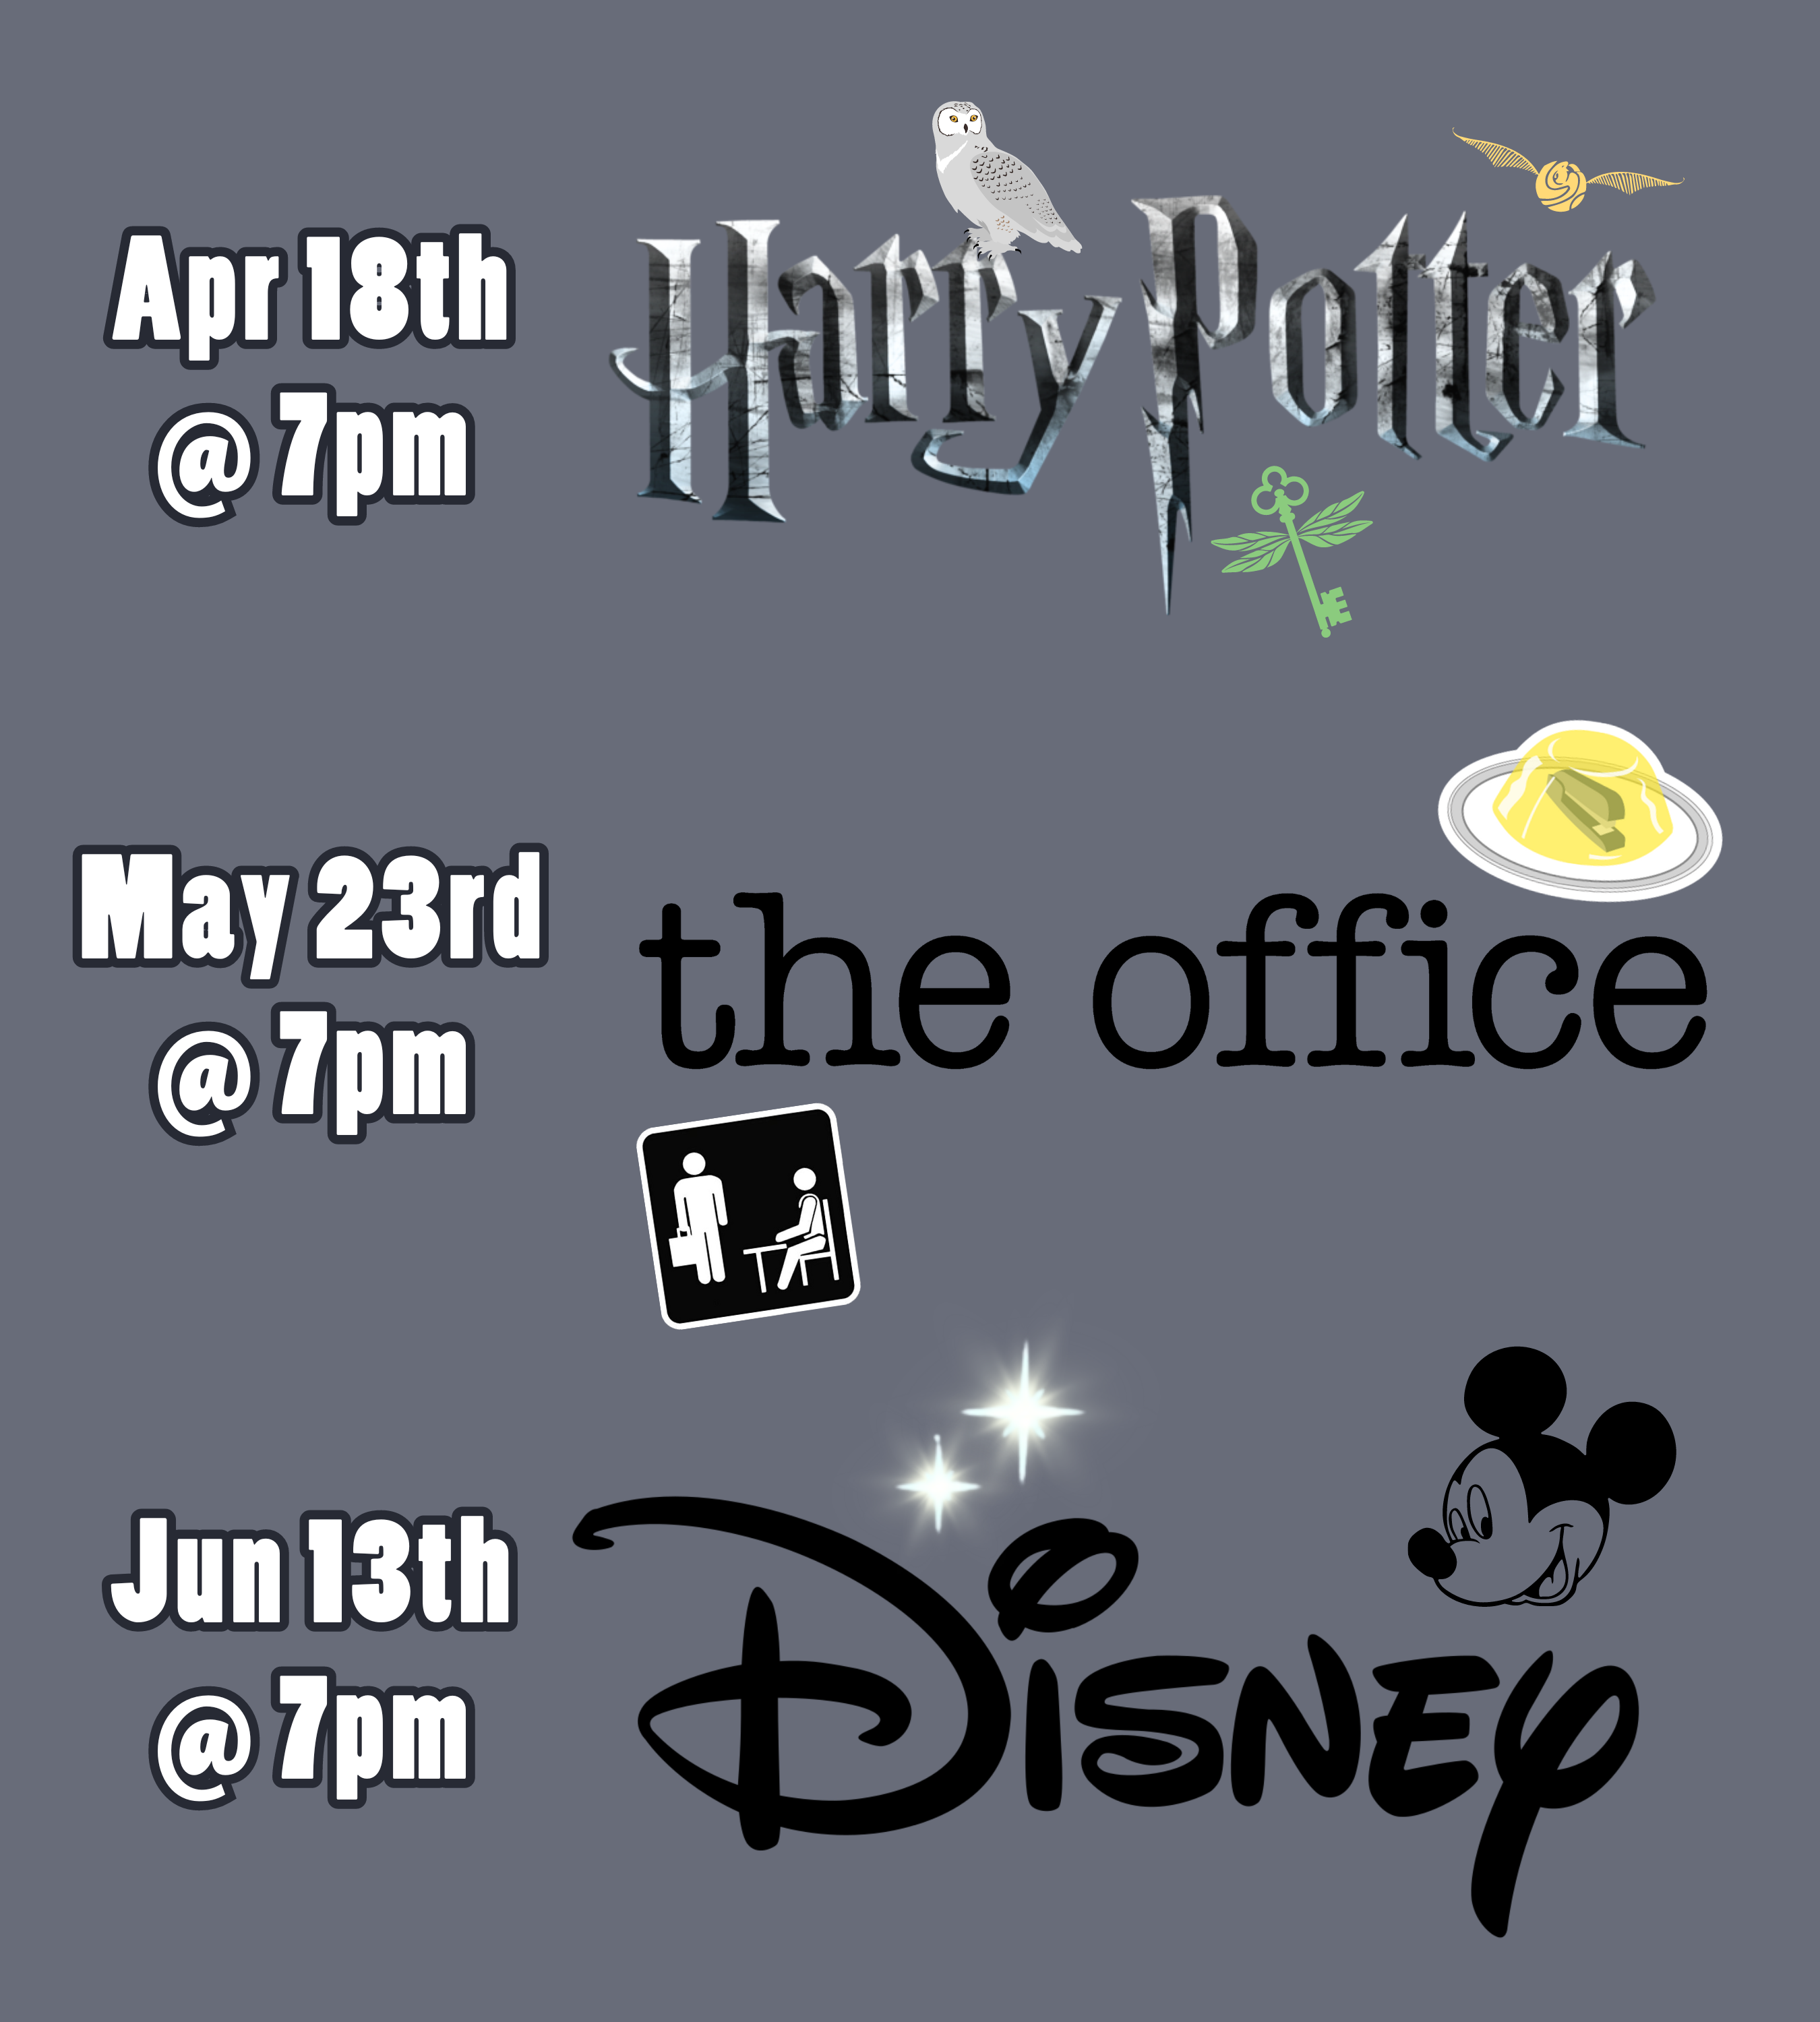 a medium gray background with text and logos. The text and logos read: April 18th at 7pm, Harry Potter. May 23rd at 7pm, The Office. June 13th at 7pm, Disney.